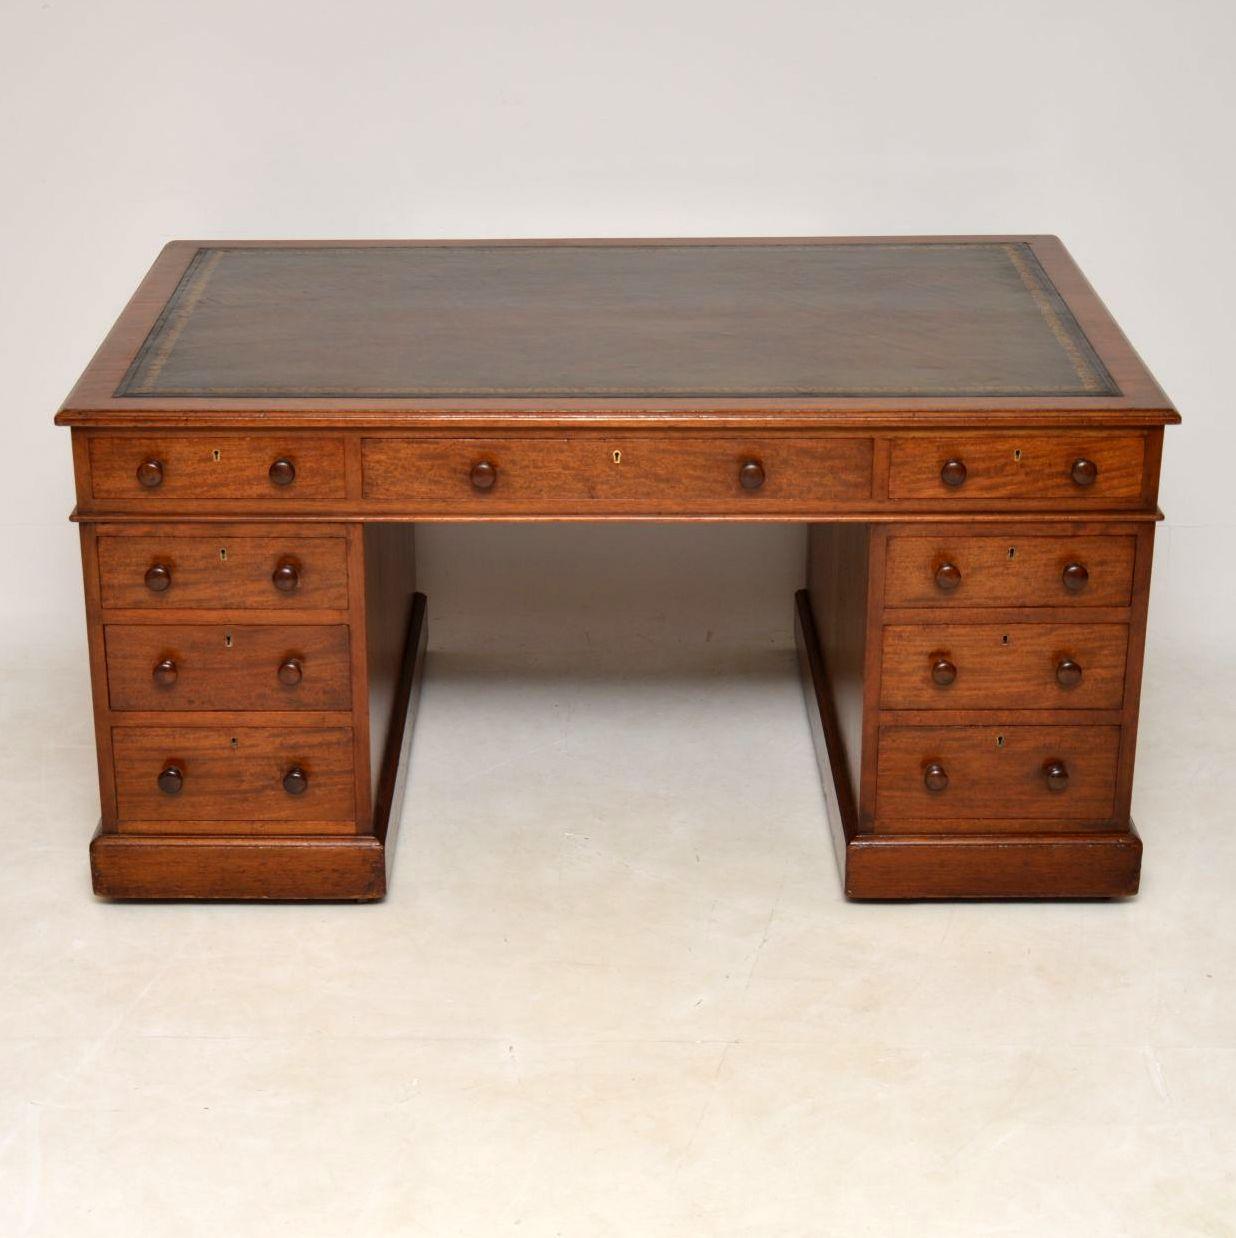 This antique Victorian mahogany partners desk is nice quality and in excellent condition. It has a hand colored tooled leather writing surface and sits on bracket feet with casters underneath. There are drawers on the top front and back. Drawers on